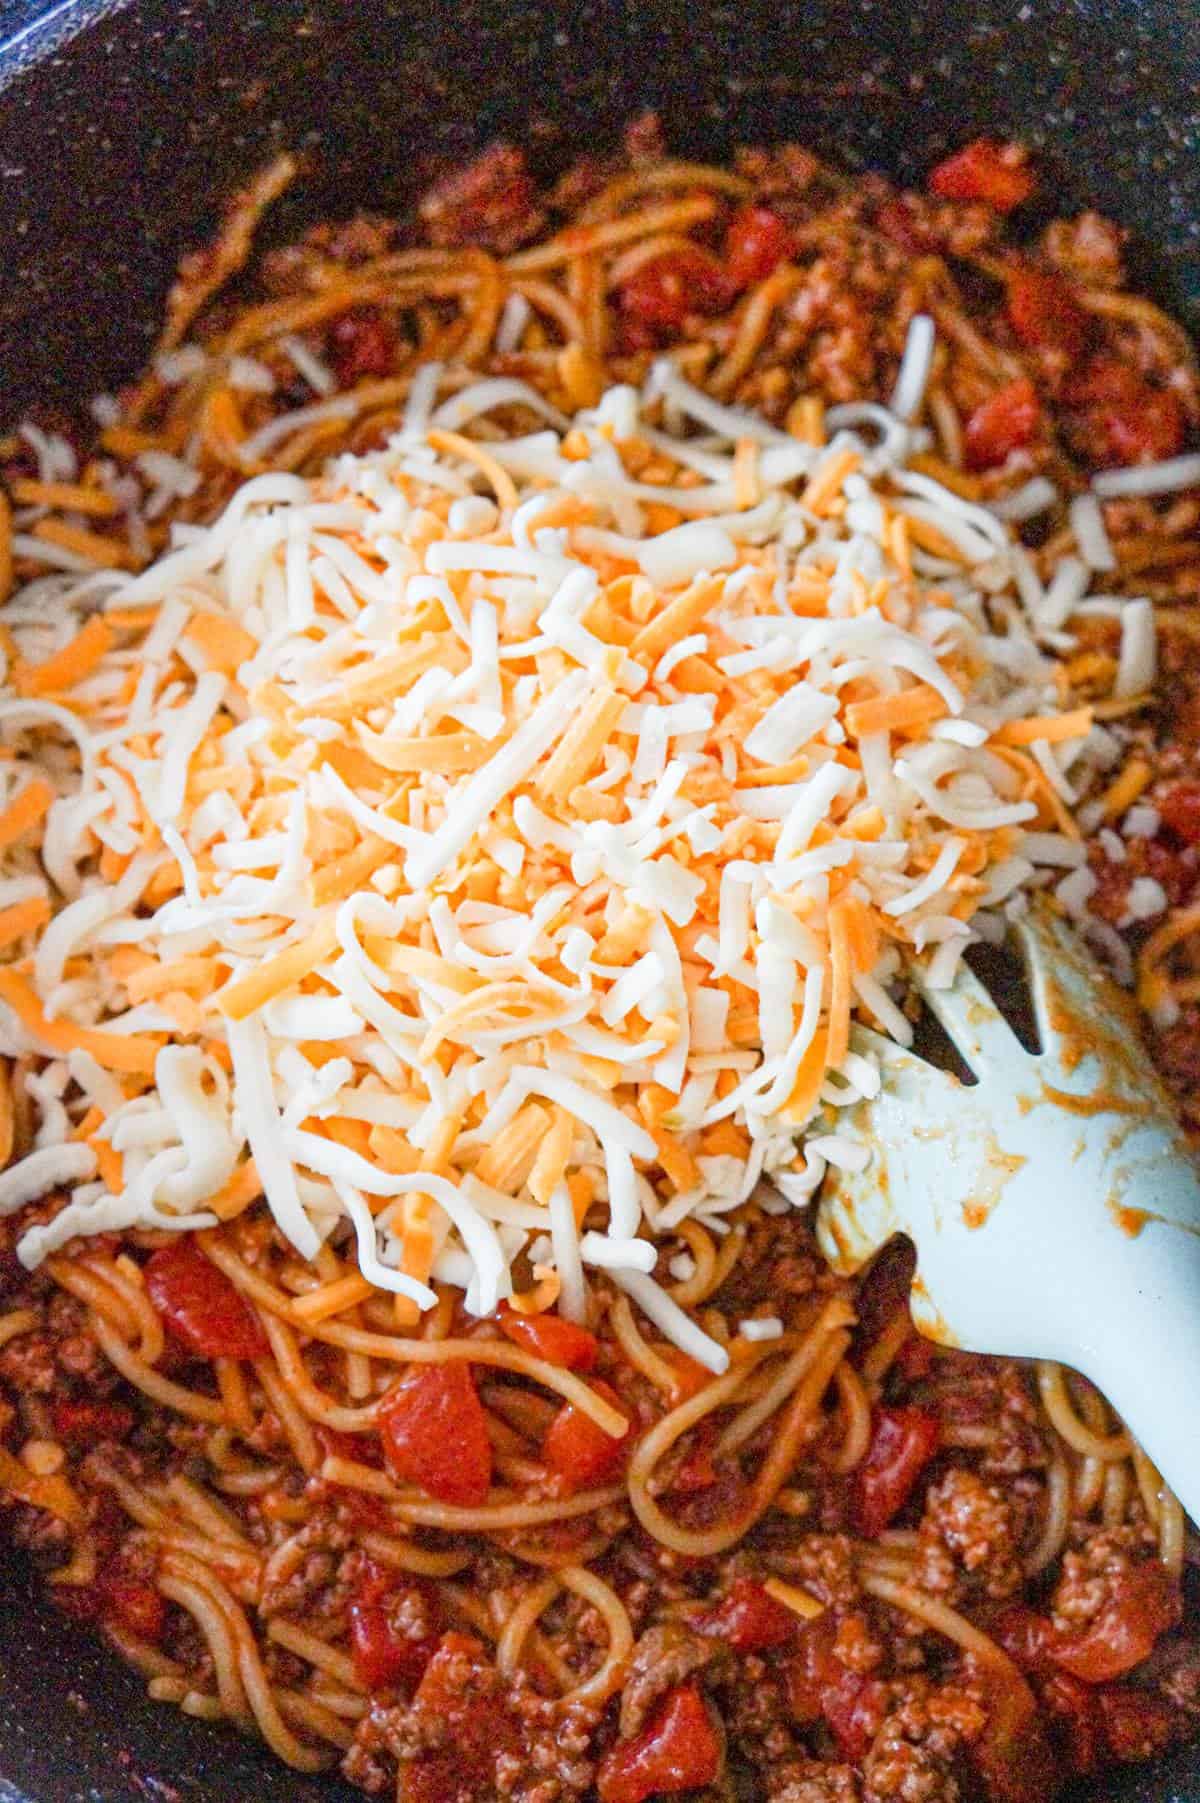 shredded cheese on top of spaghetti with ground beef in a saute pan